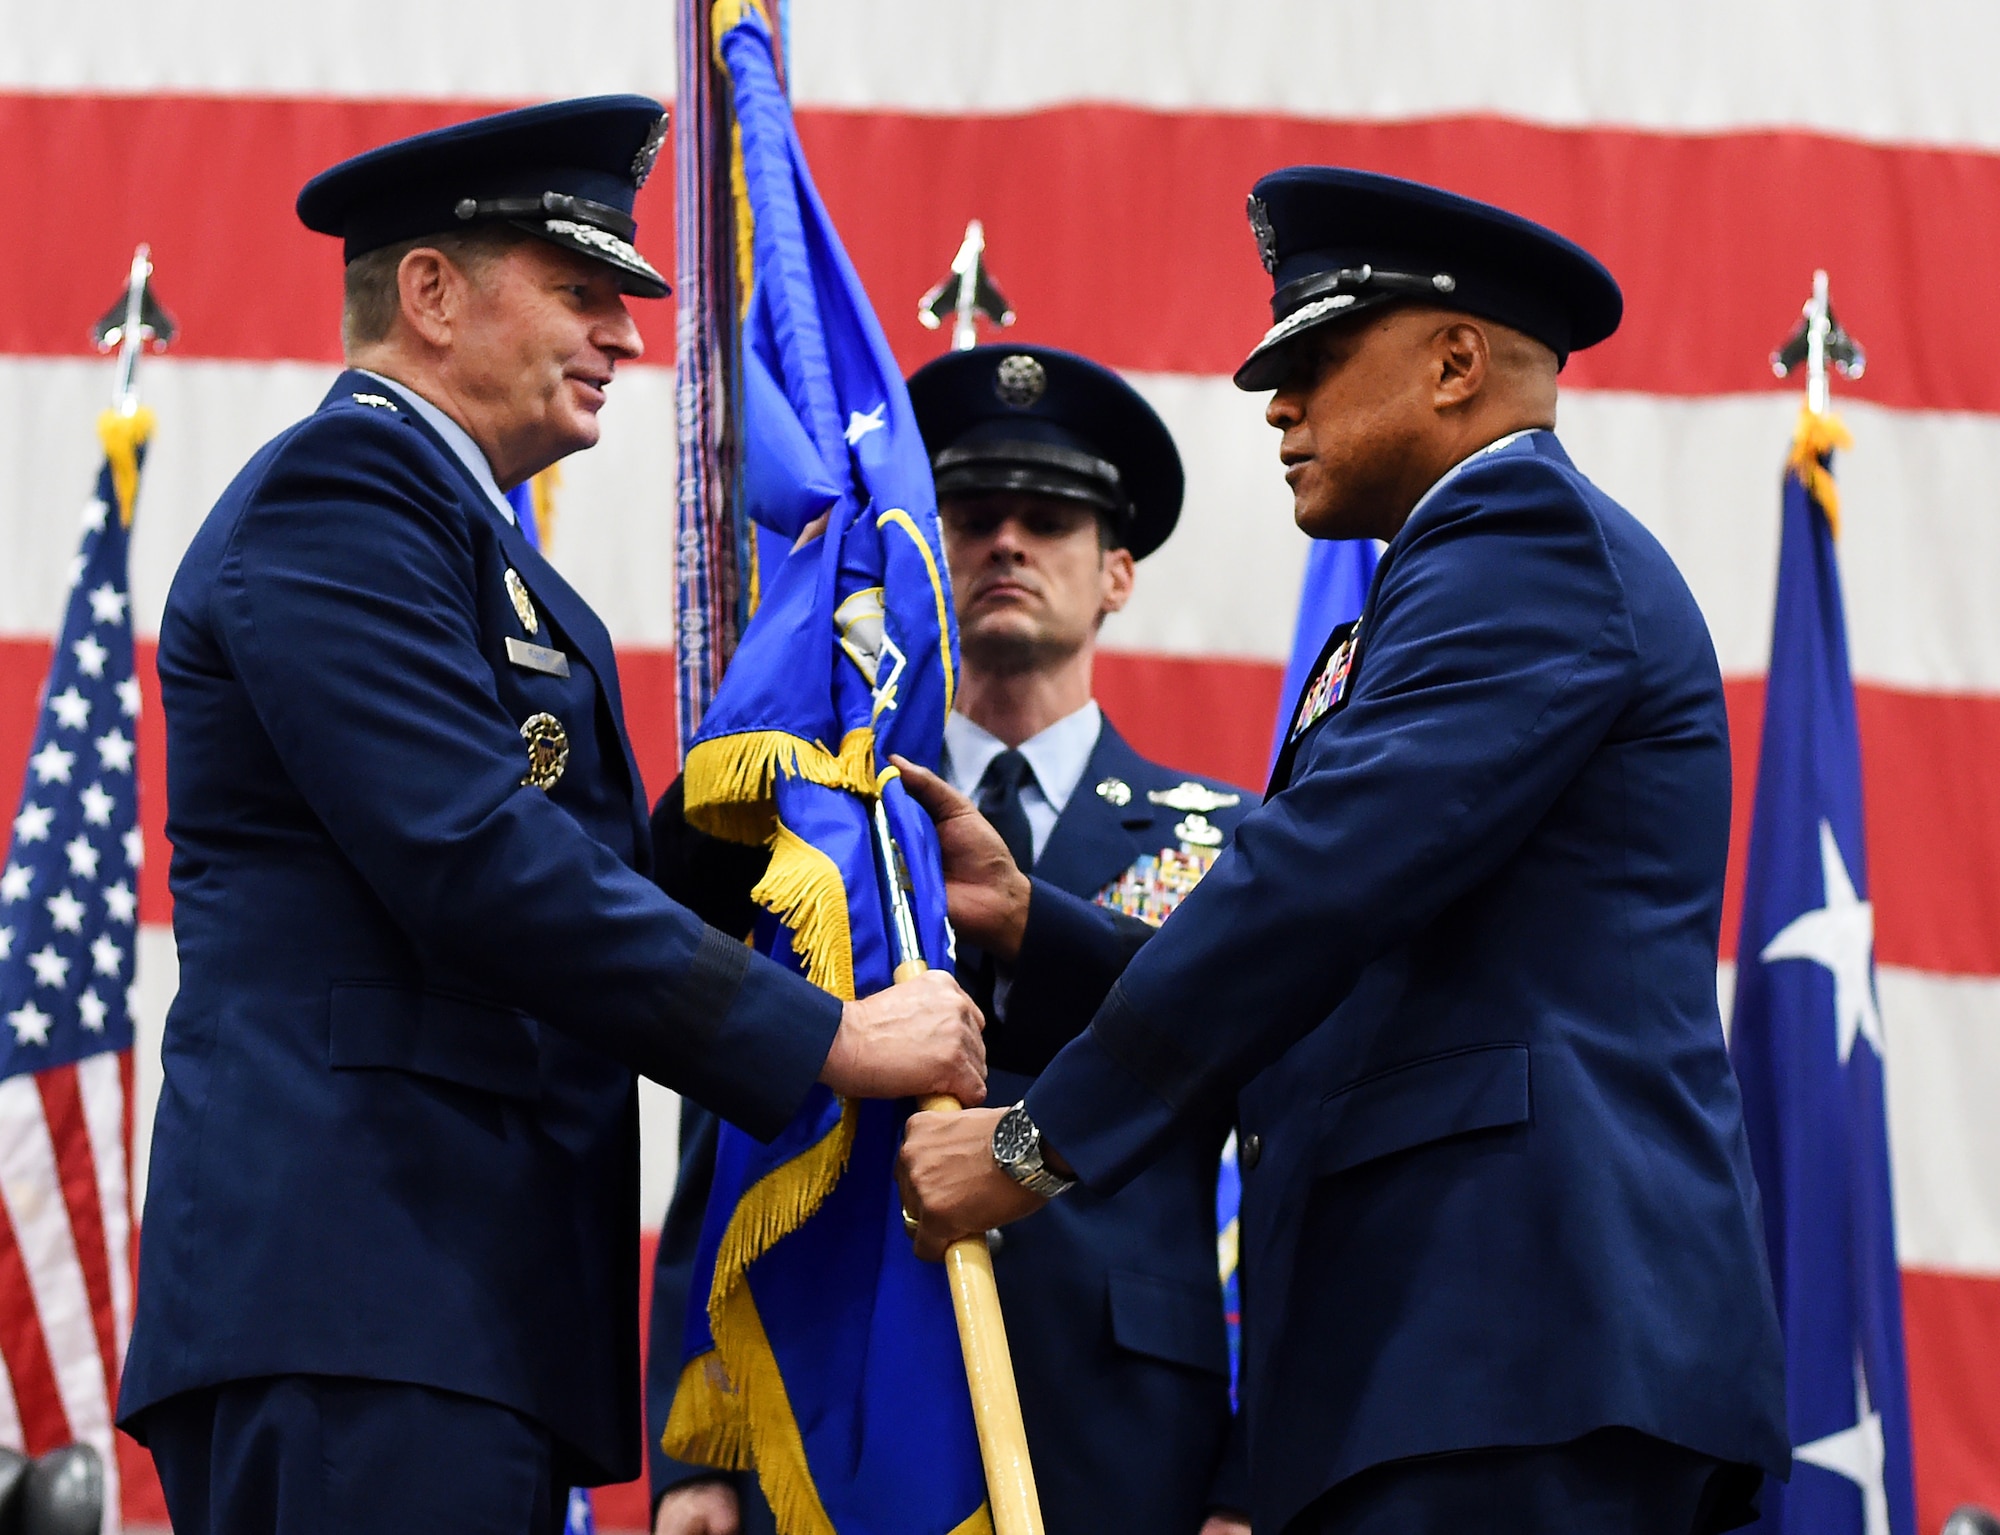 Gen. Robin Rand, Air Force Global Strike Command commander, presents the 20th Air Force guidon to Maj. Gen. Anthony J. Cotton at F.E. Warren Air Force Base, Wyo., Nov. 16, 2015, as Cotton takes command of the numbered air force responsible for the nation's three intercontinental ballistic missile wings and one nuclear operations support wing. Cotton also took command of Task Force 214 from Adm. Cecil D. Haney, U.S. Strategic Command commander, during the same ceremony.  Twentieth Air Force prepares the nation's ICBM forces to execute safe, secure and effective nuclear strike operations and supports worldwide combatant commander requirements. (U.S. Air Force photo by R.J. Oriez)